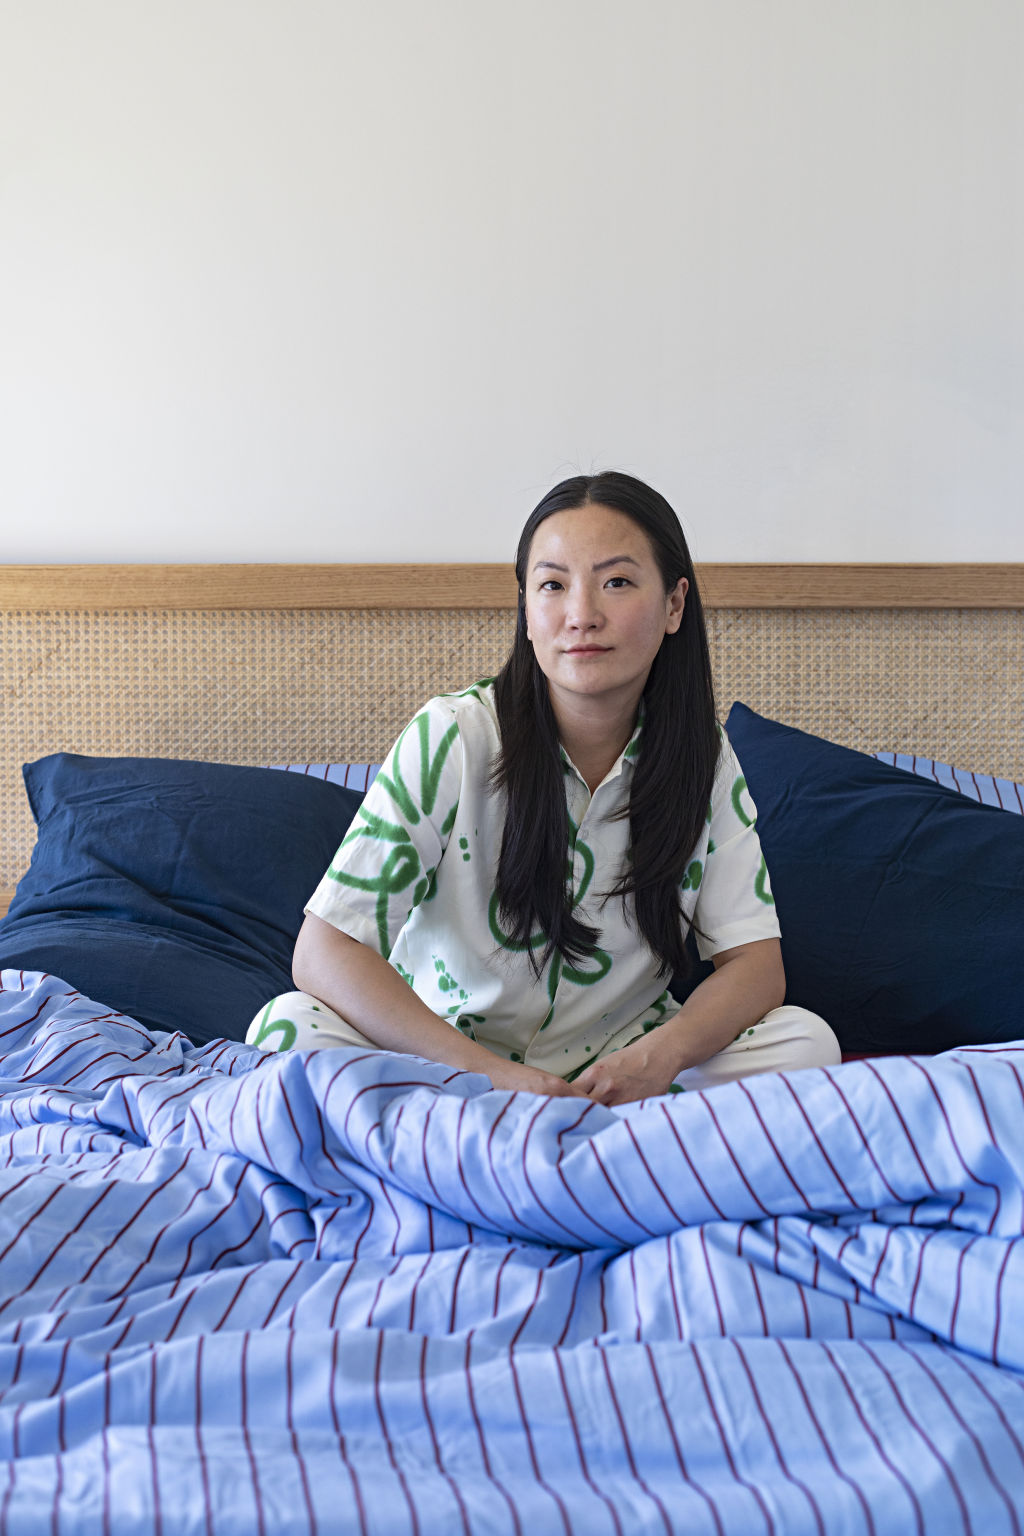 Christine Lafian launched her Melbourne label Suku with colourful bedding. Photo: Natalie Jeffcott